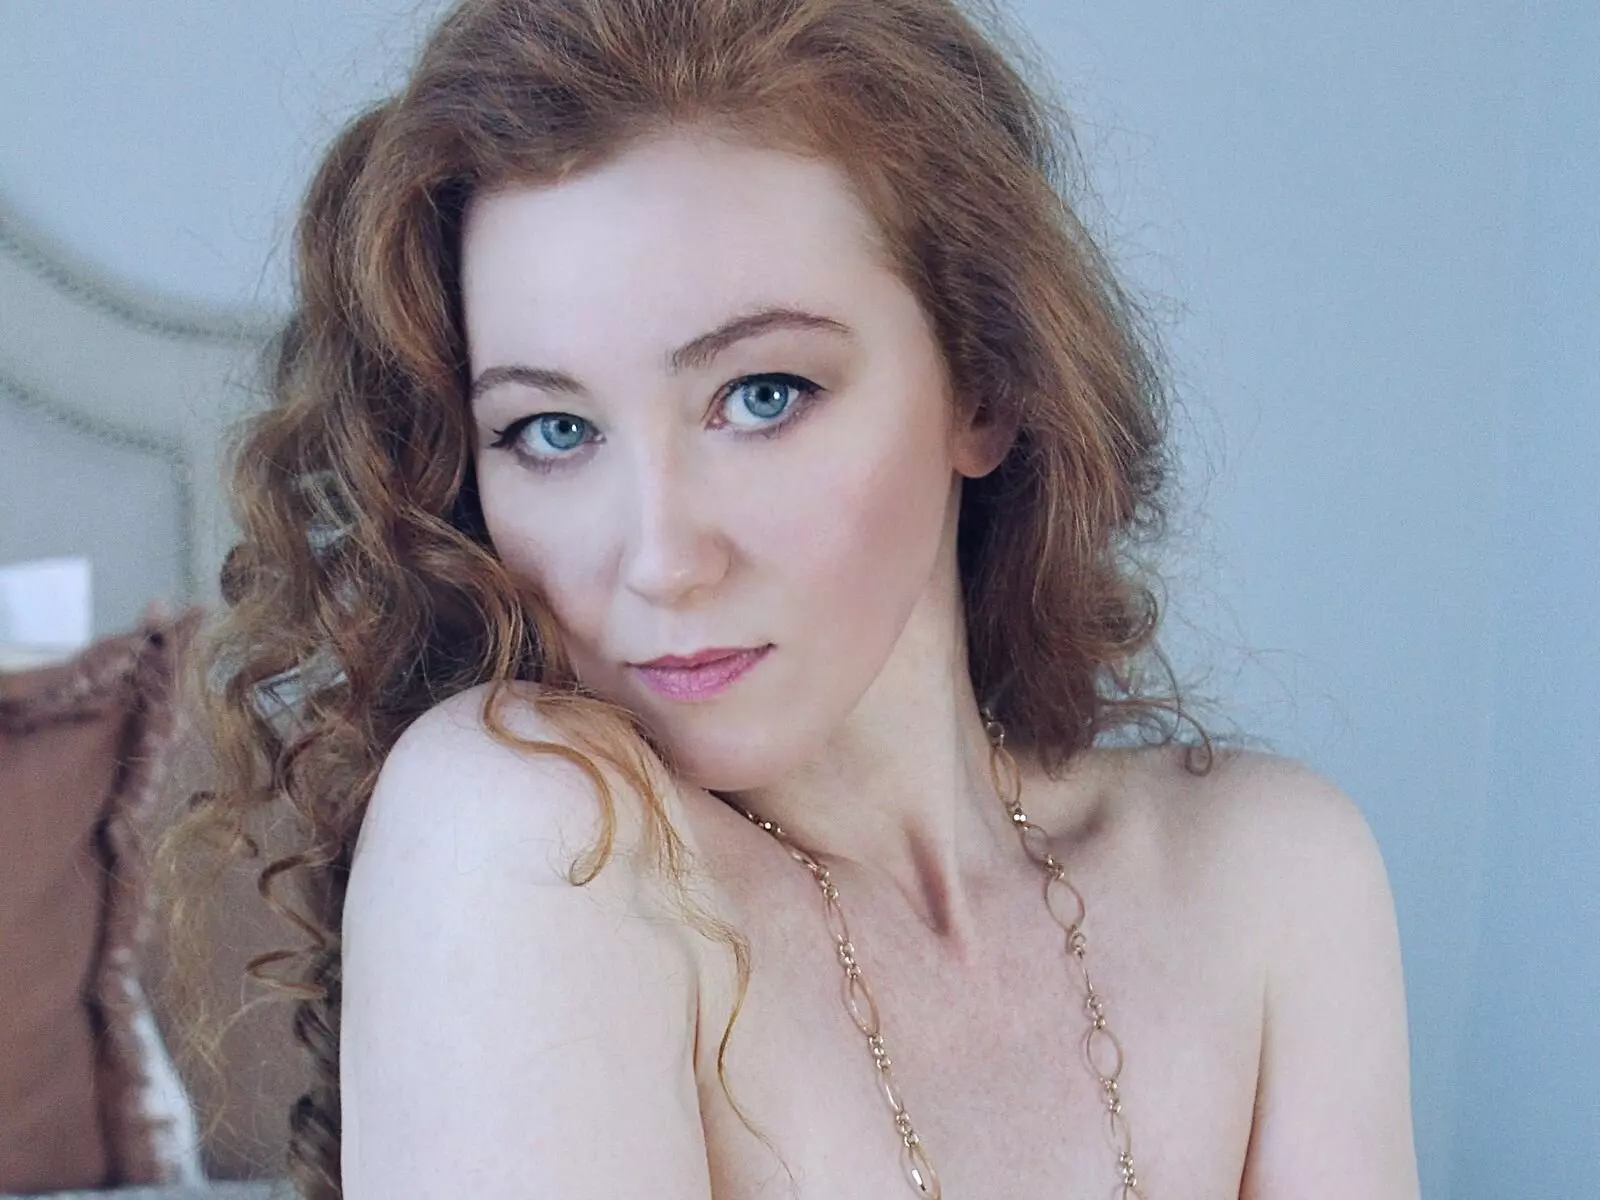 View more of GingerJulia